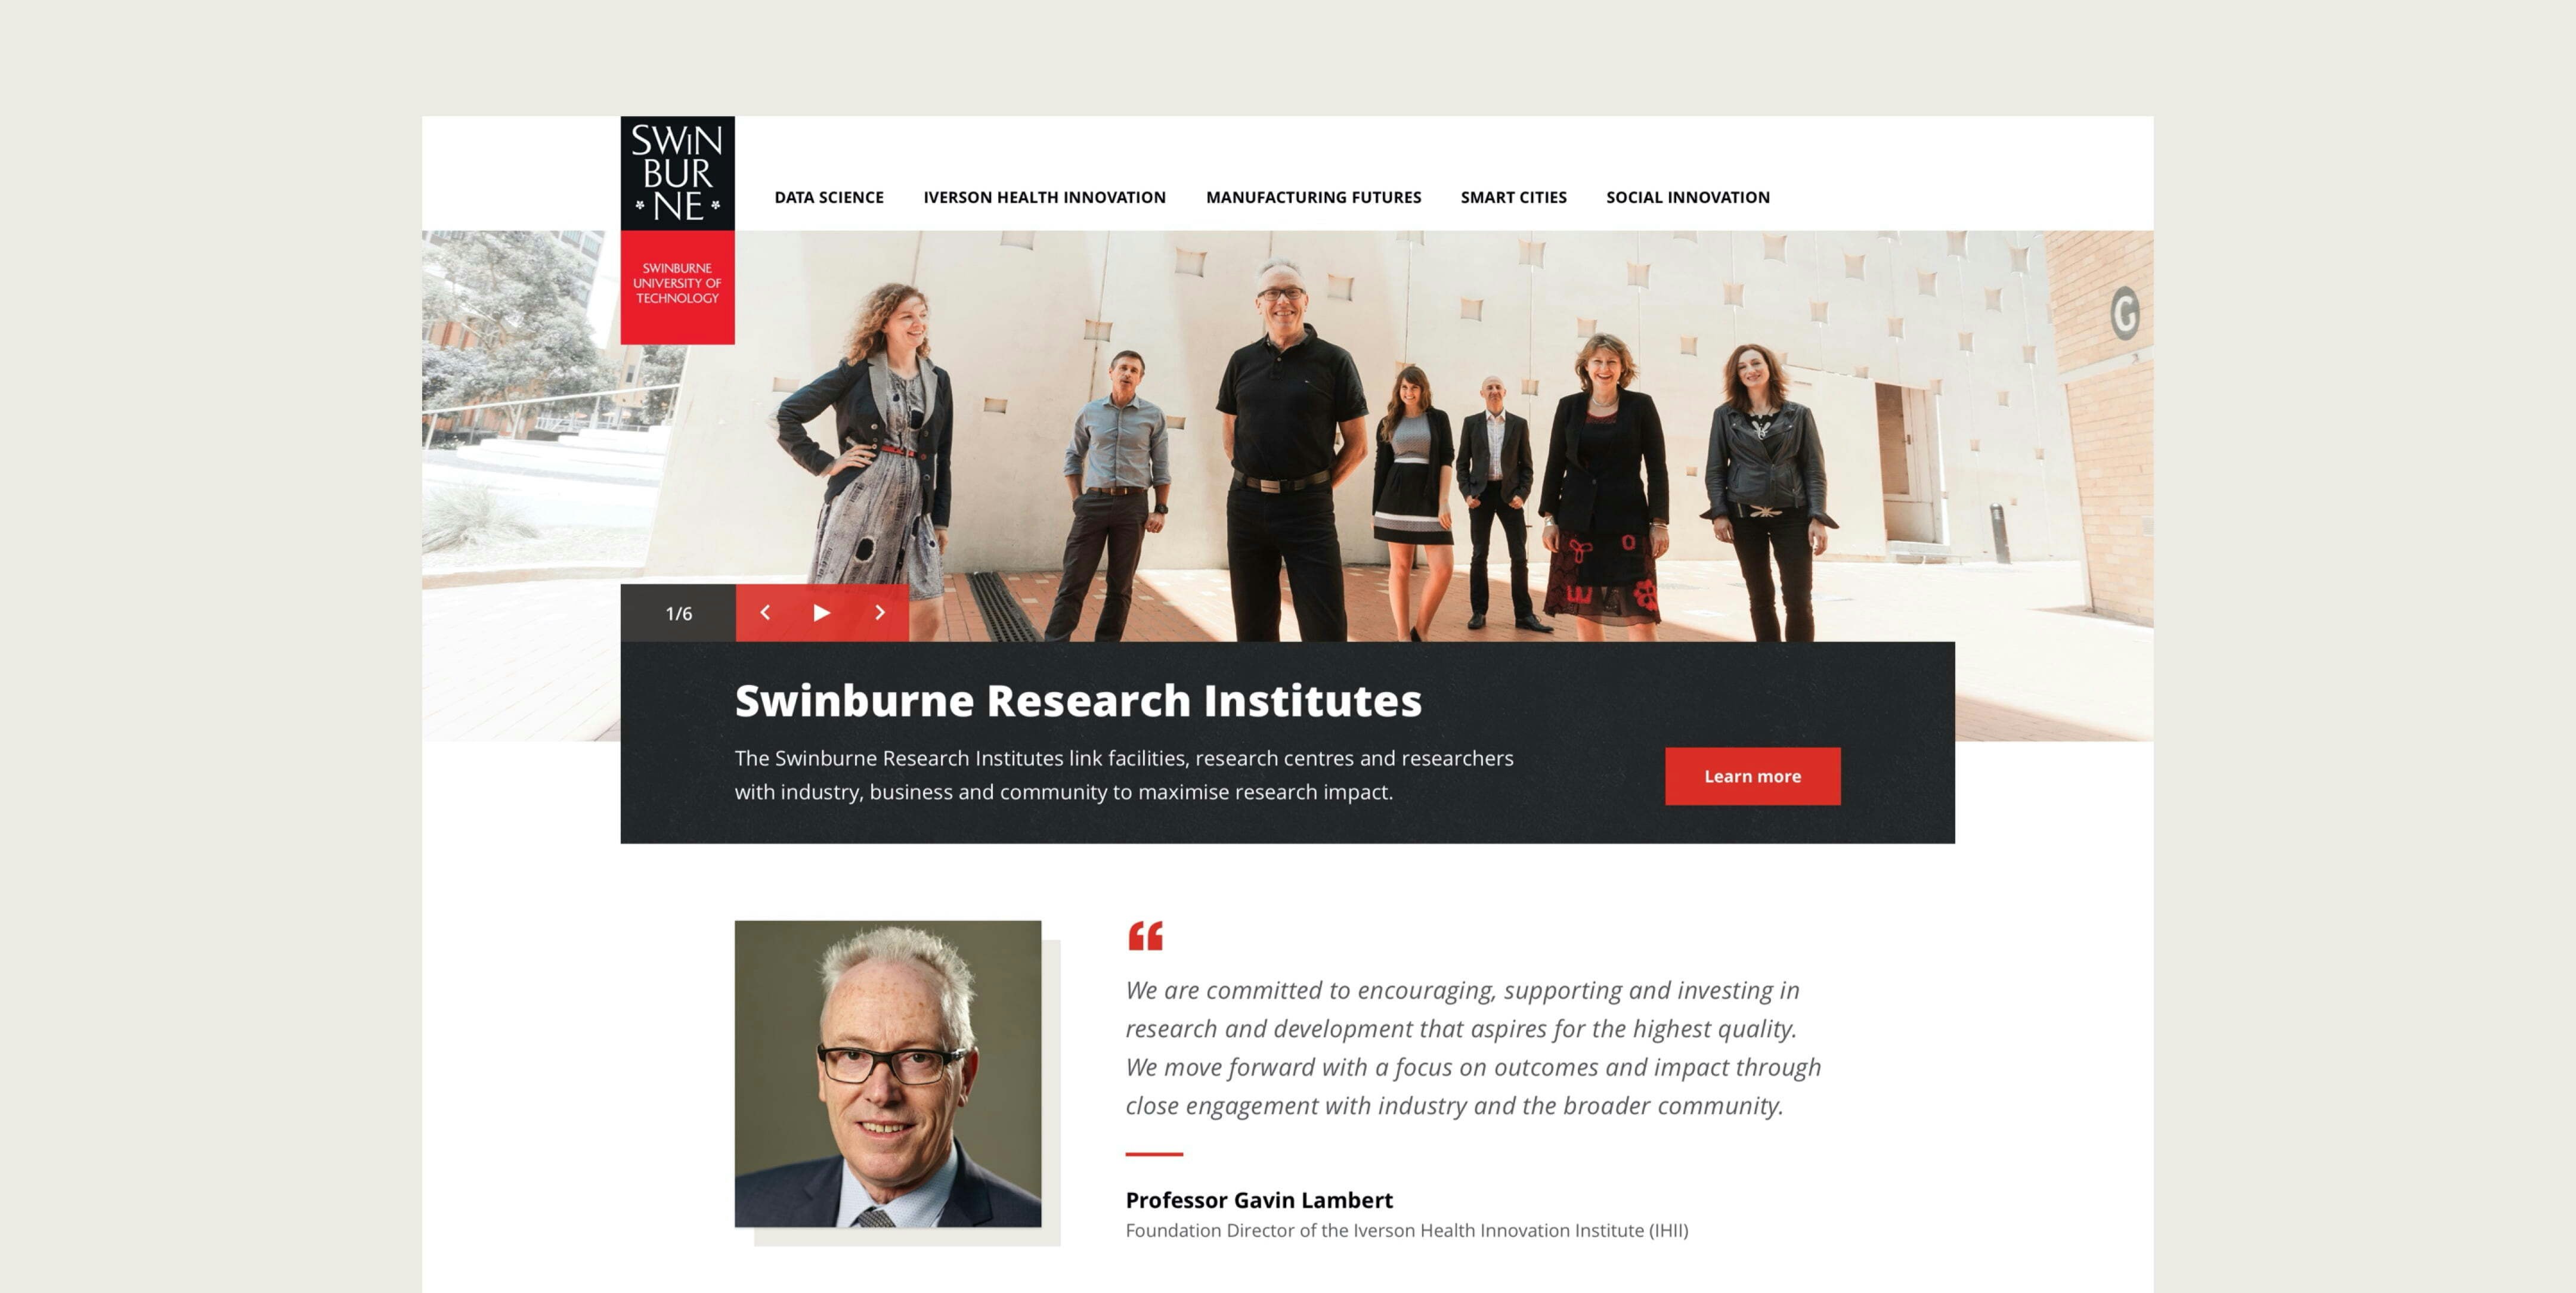 Swinburne’s research institutes home page